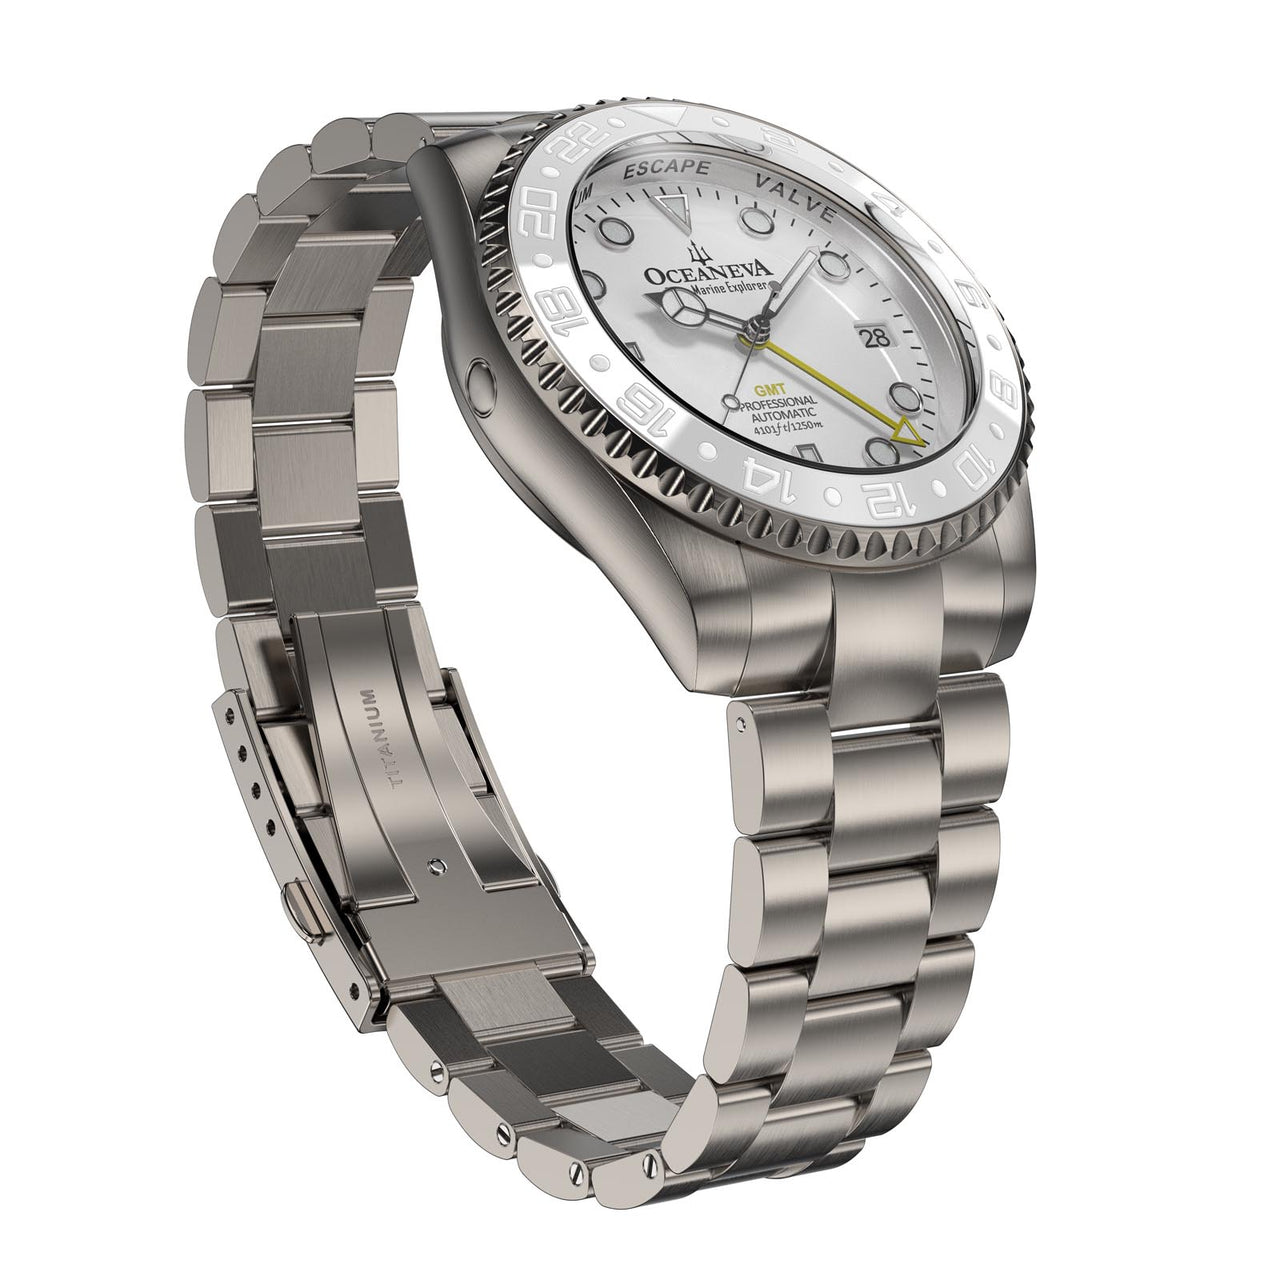 Oceaneva Men's GMT Titanium Watch: A blend of elegance and resilience